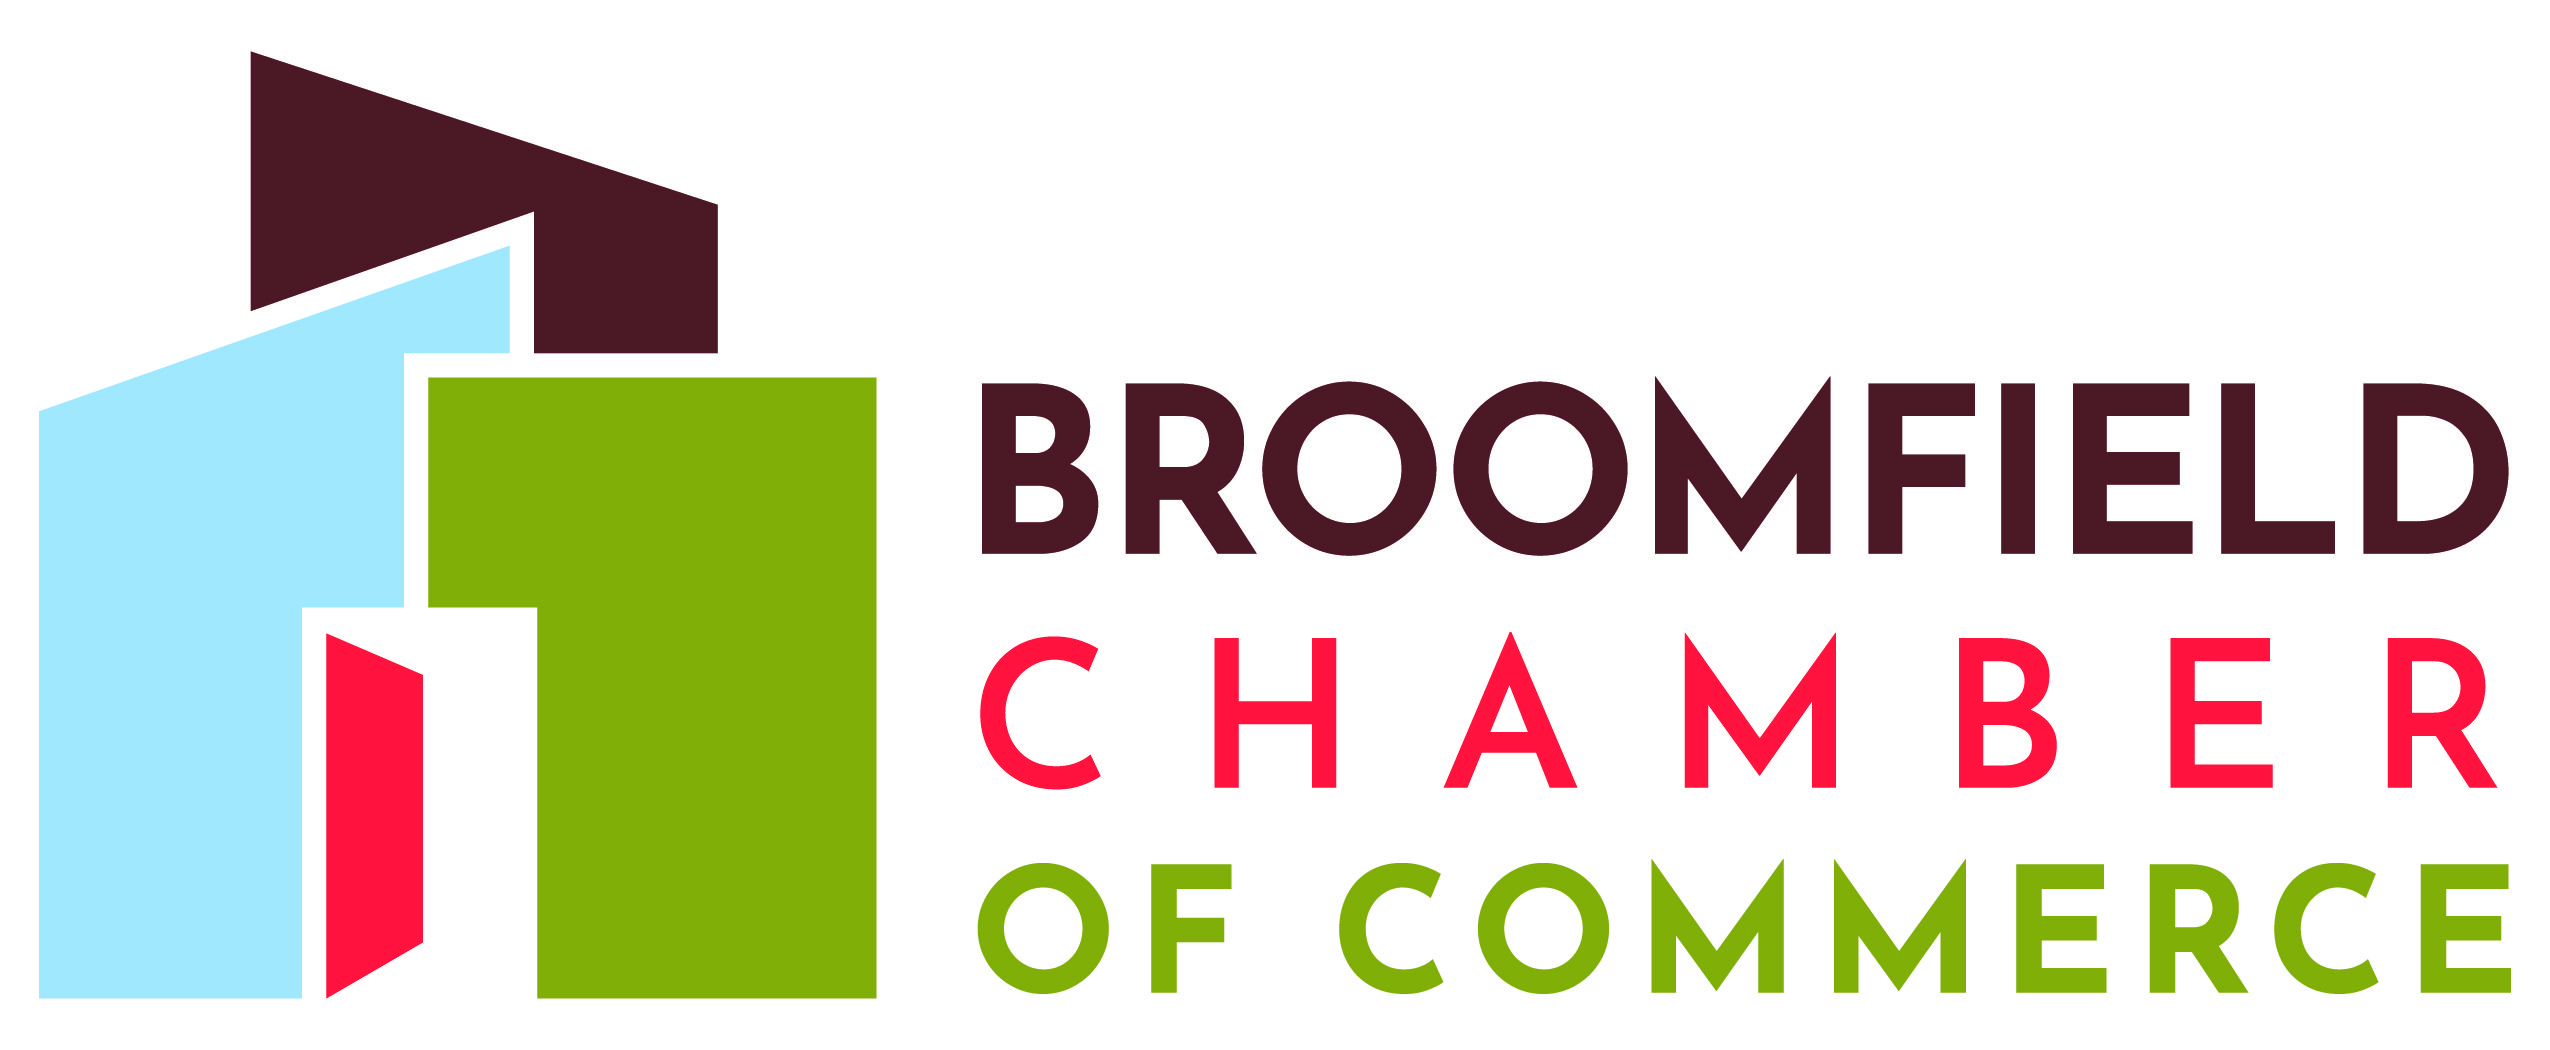 Broomfield Chamber of Commerce